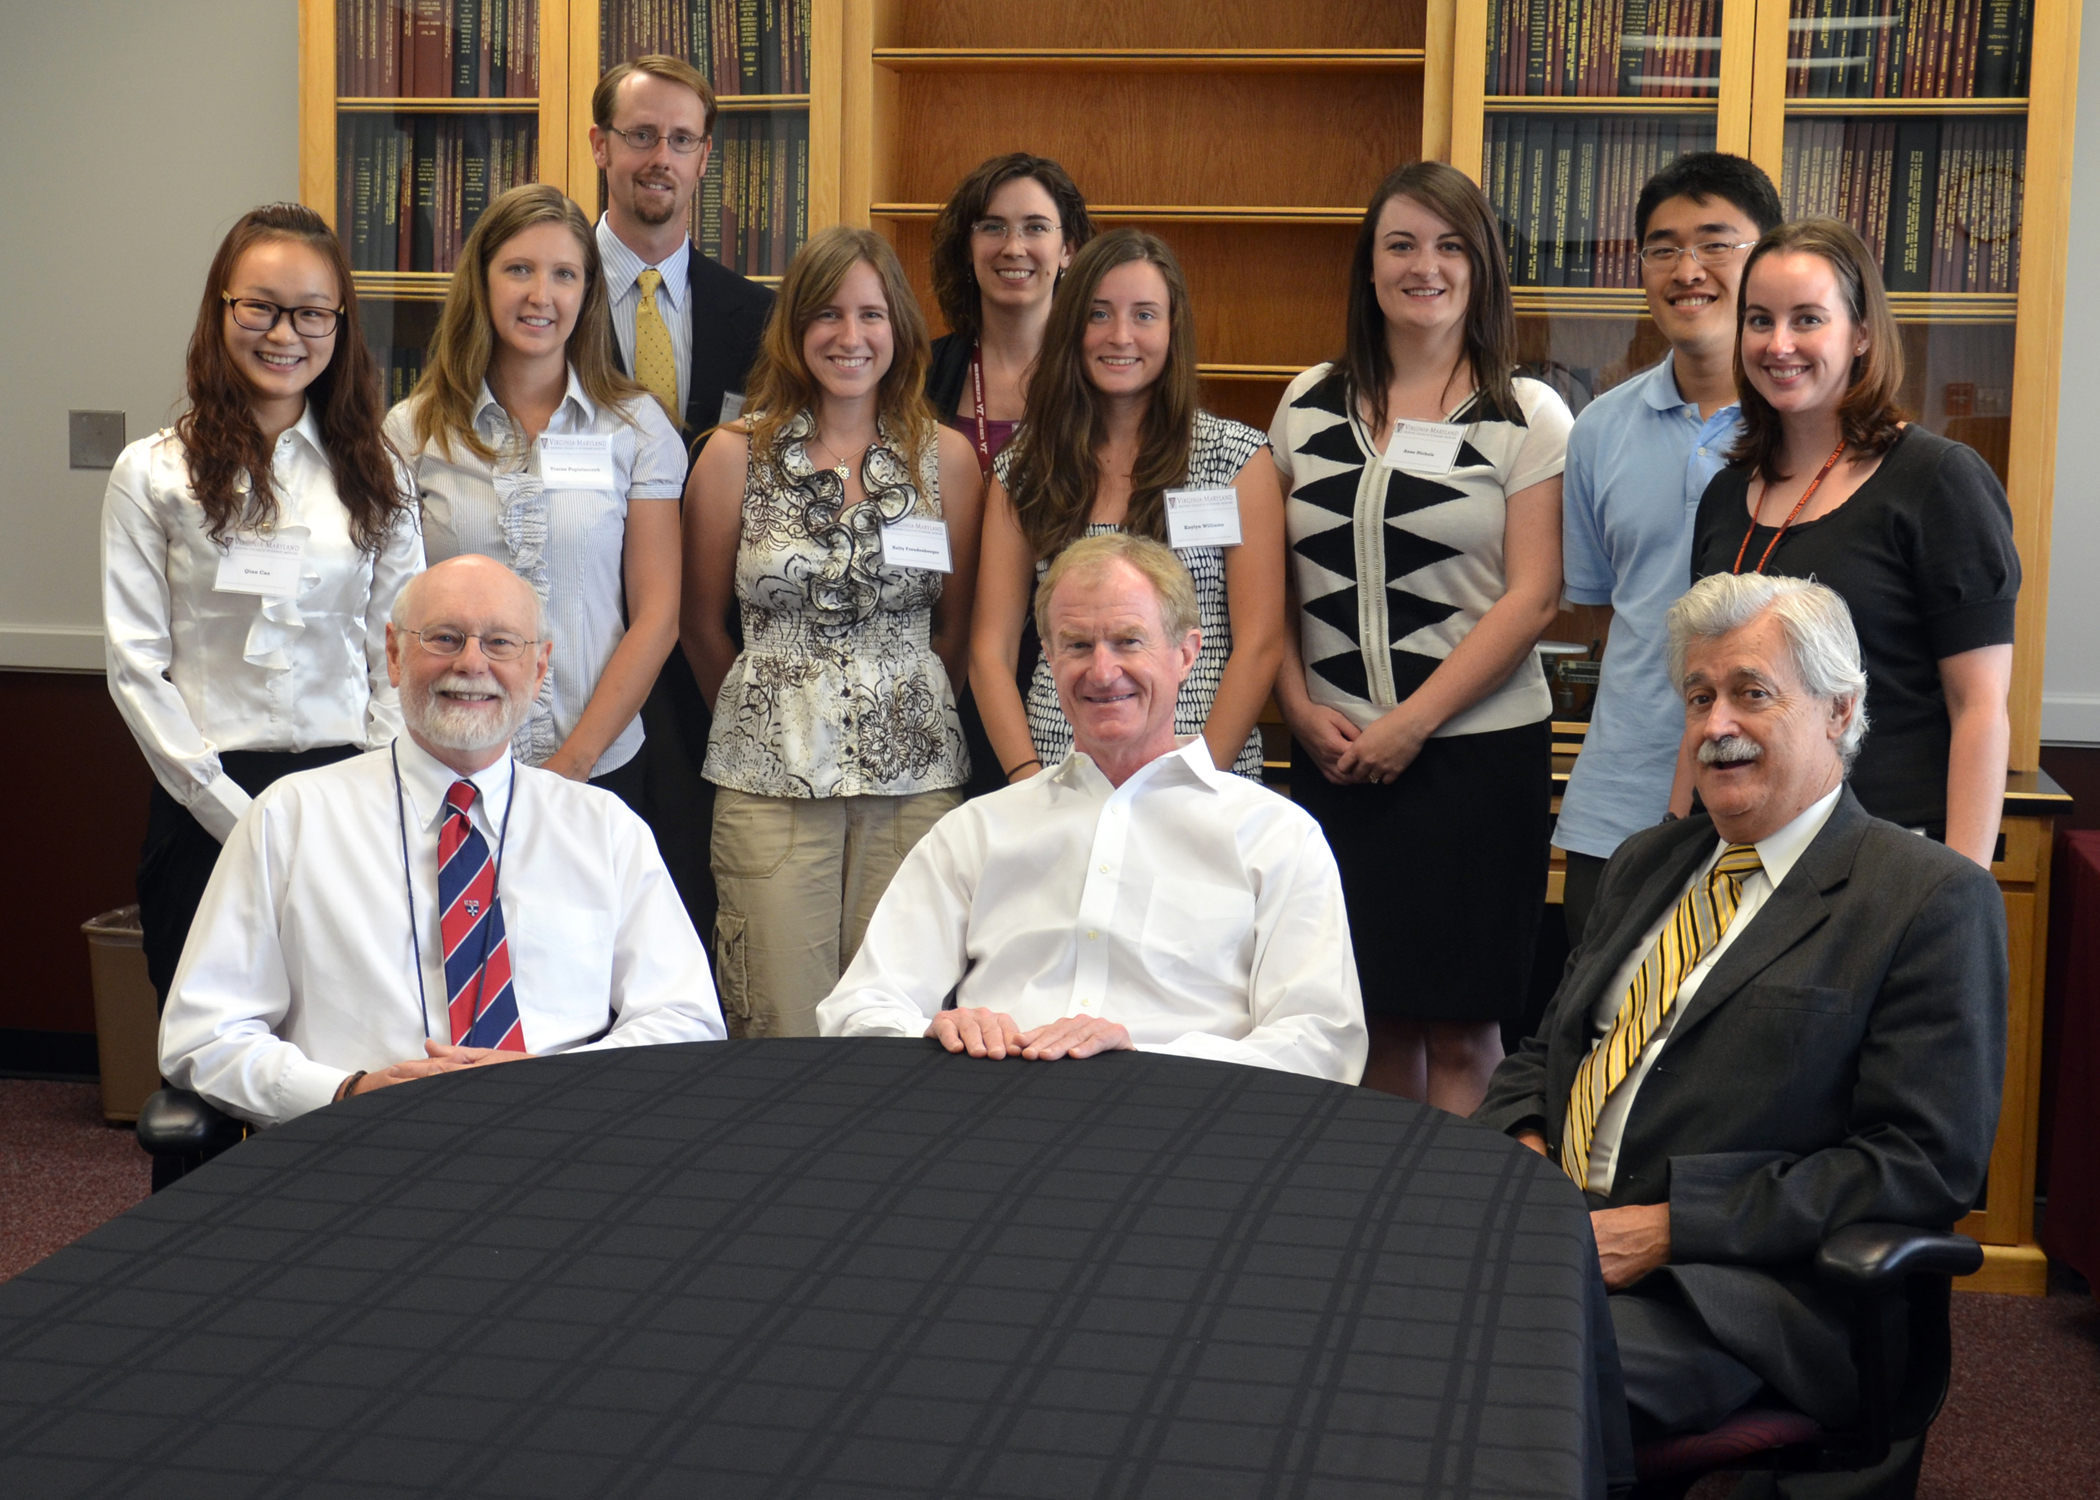 Graduate students meet with scholarship benefactor, E. Roe Stamps, IV.